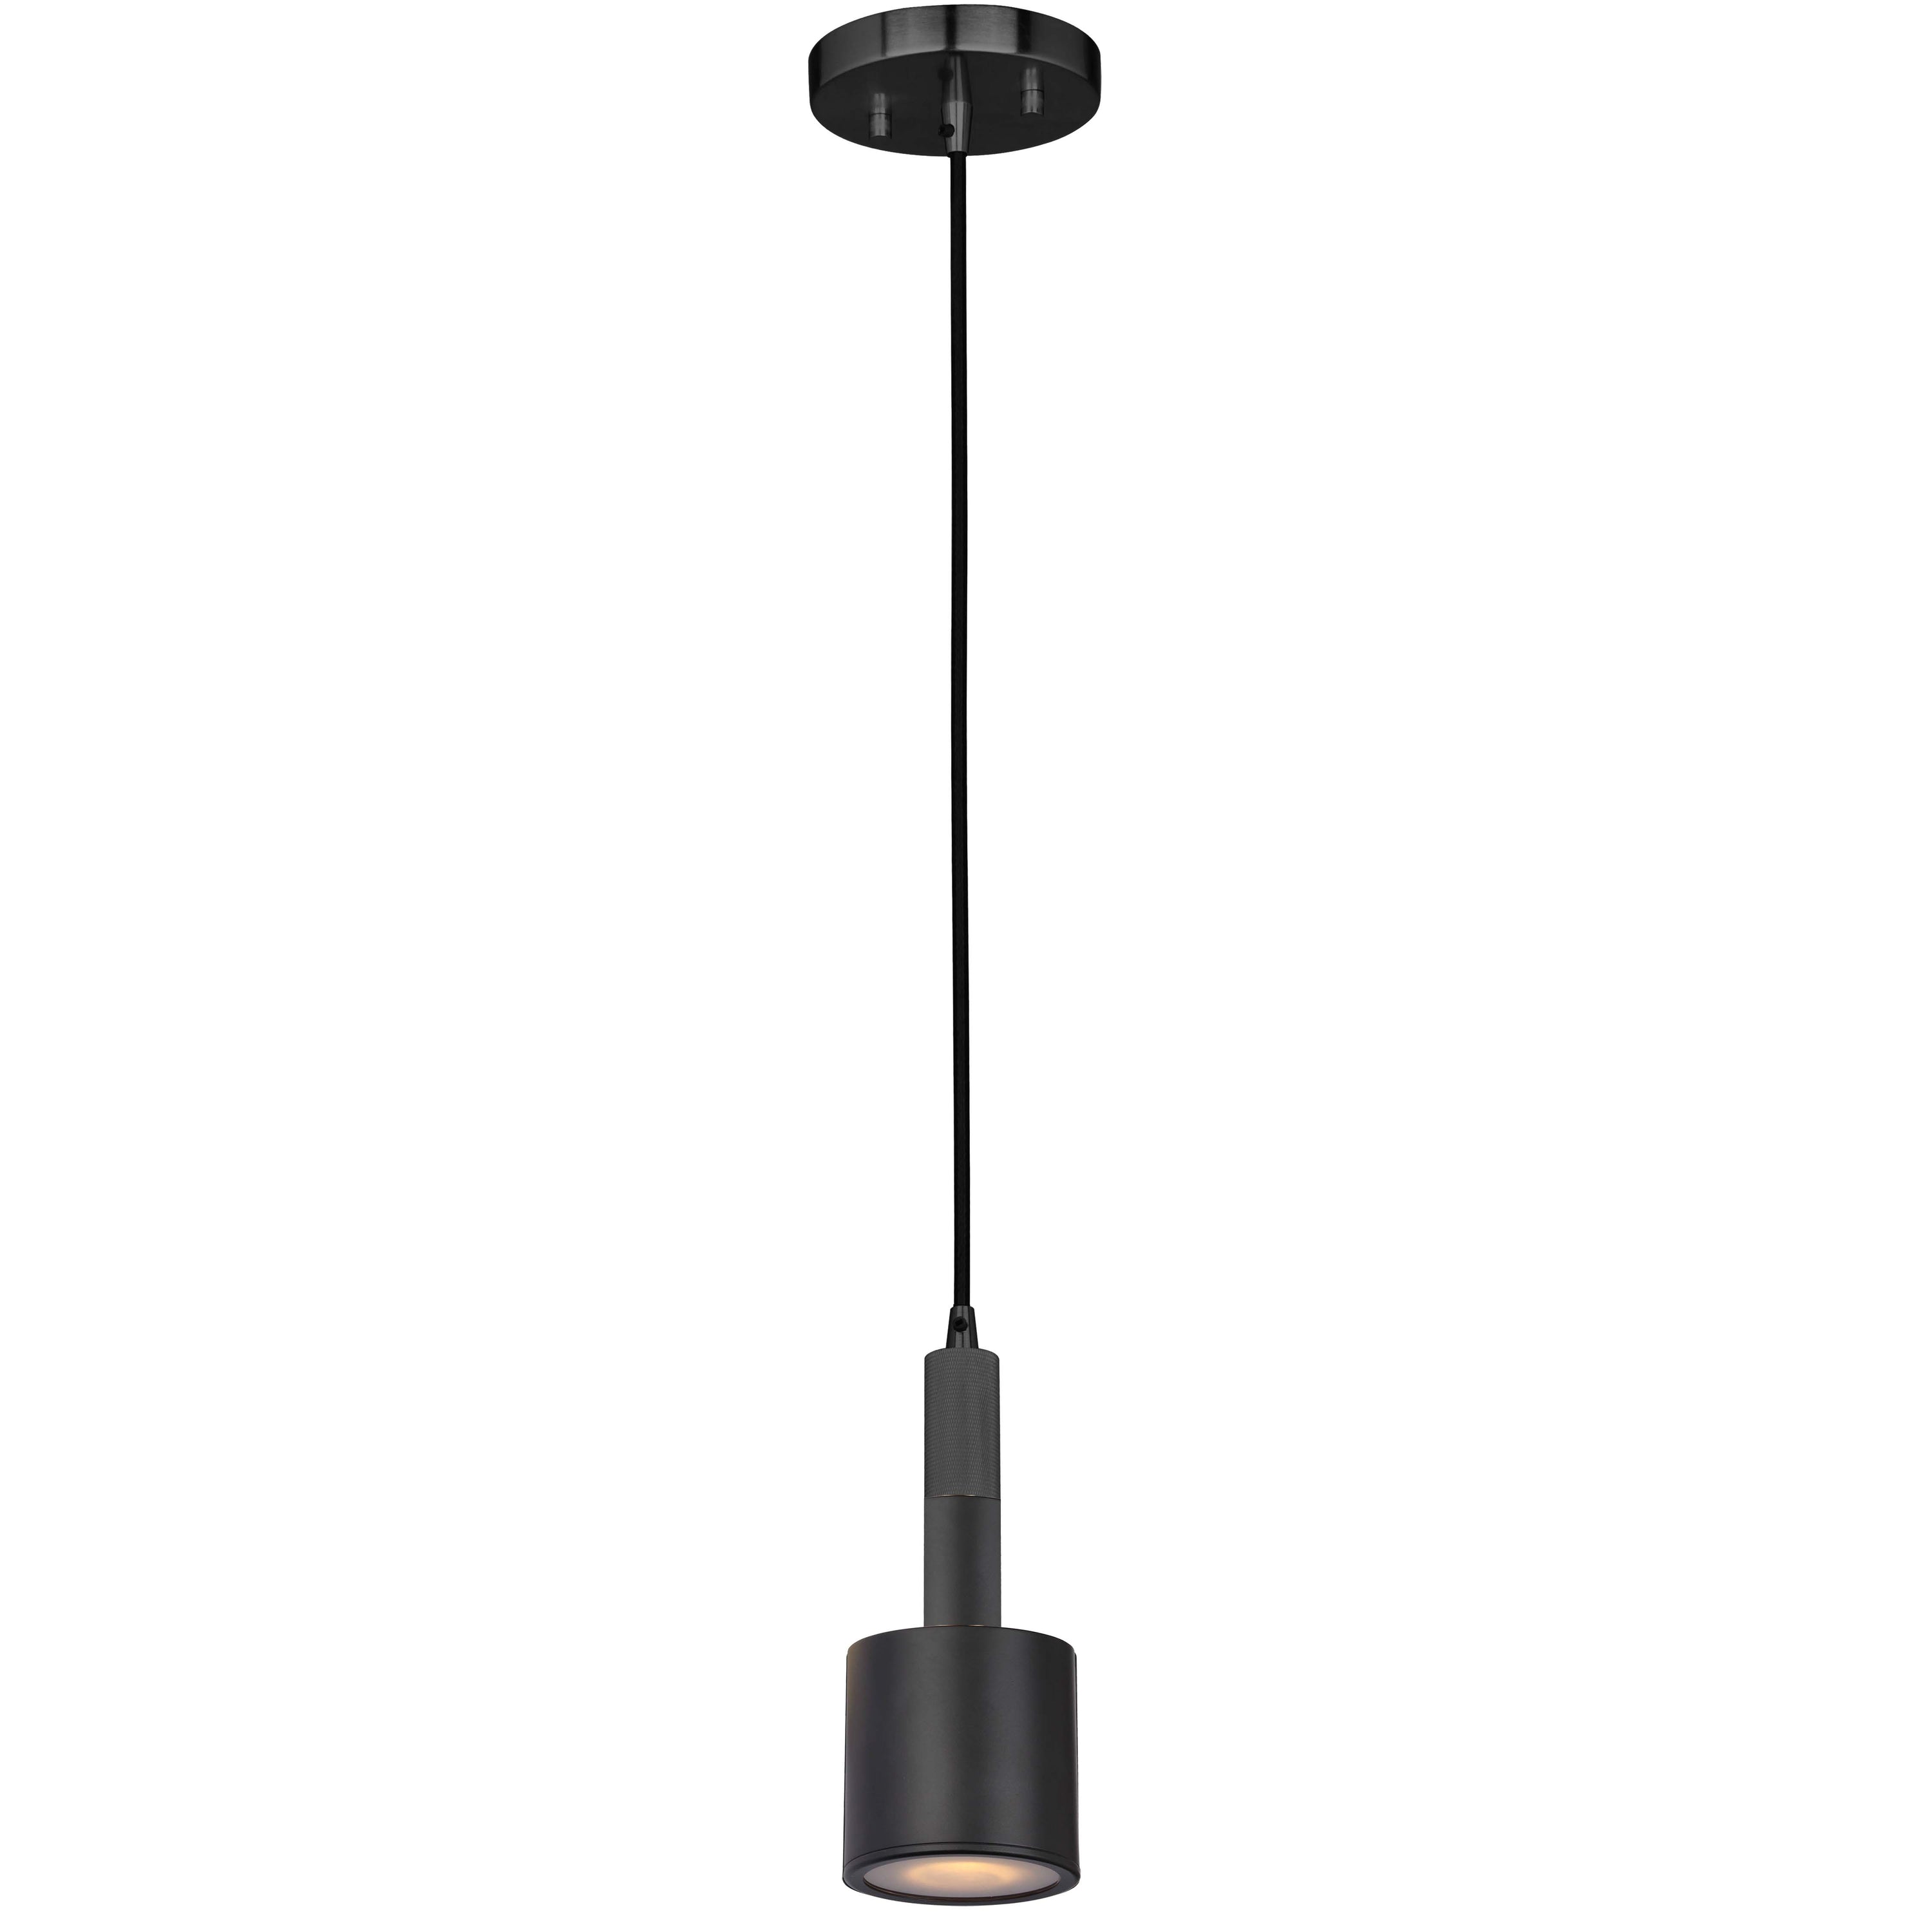 Dainolite RHS-1P-MB 1 Light Pendant Matte Black with Frosted Diffuser